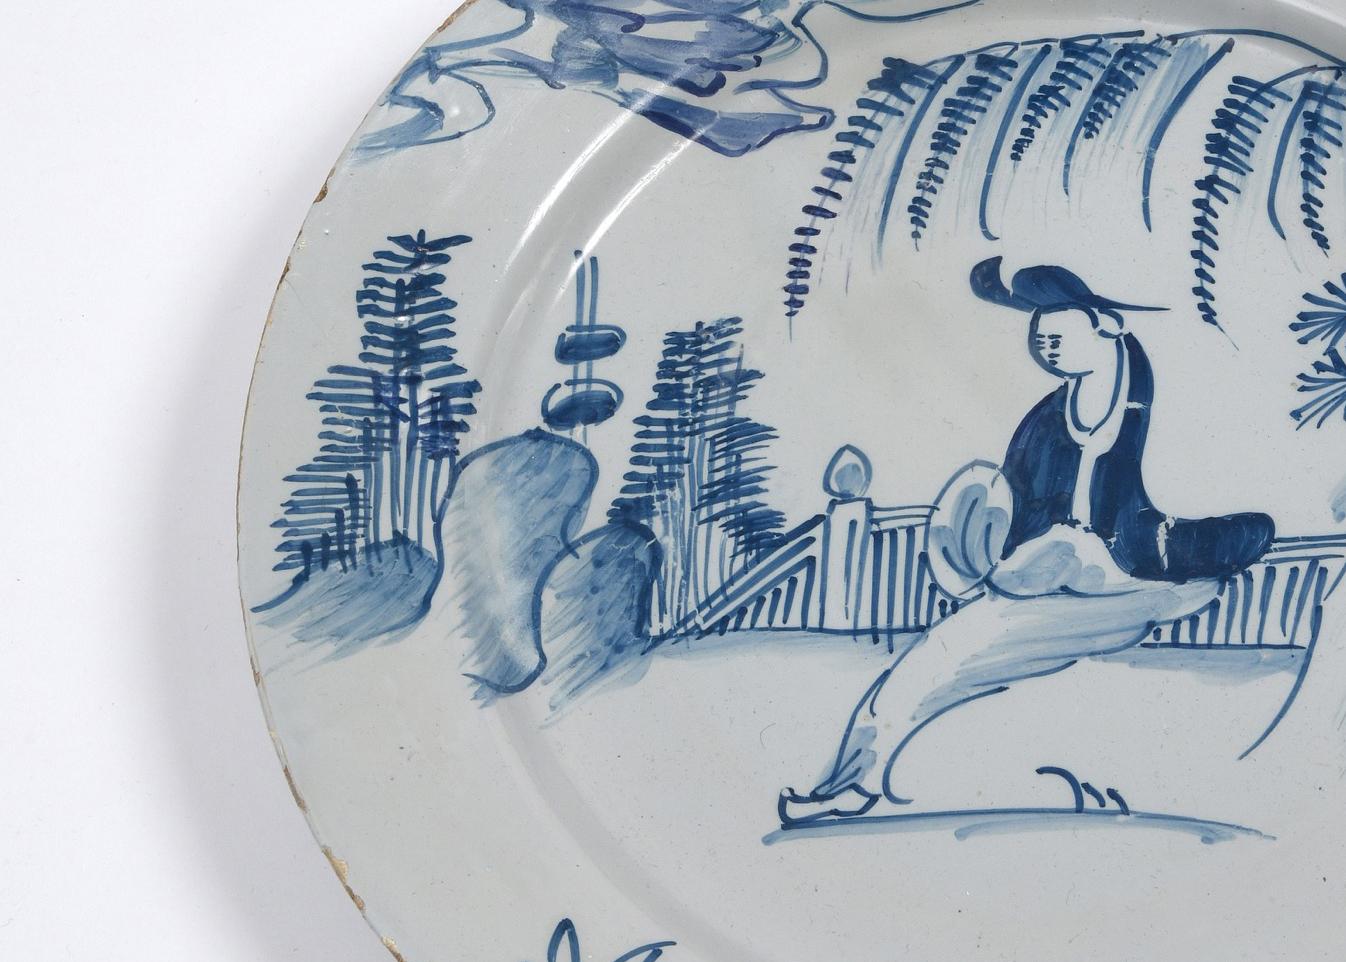 A wonderfully decorative English, 18th century delftware tin-glazed ceramic plate. In very good antique condition

Measures: Diameter 34 cm.